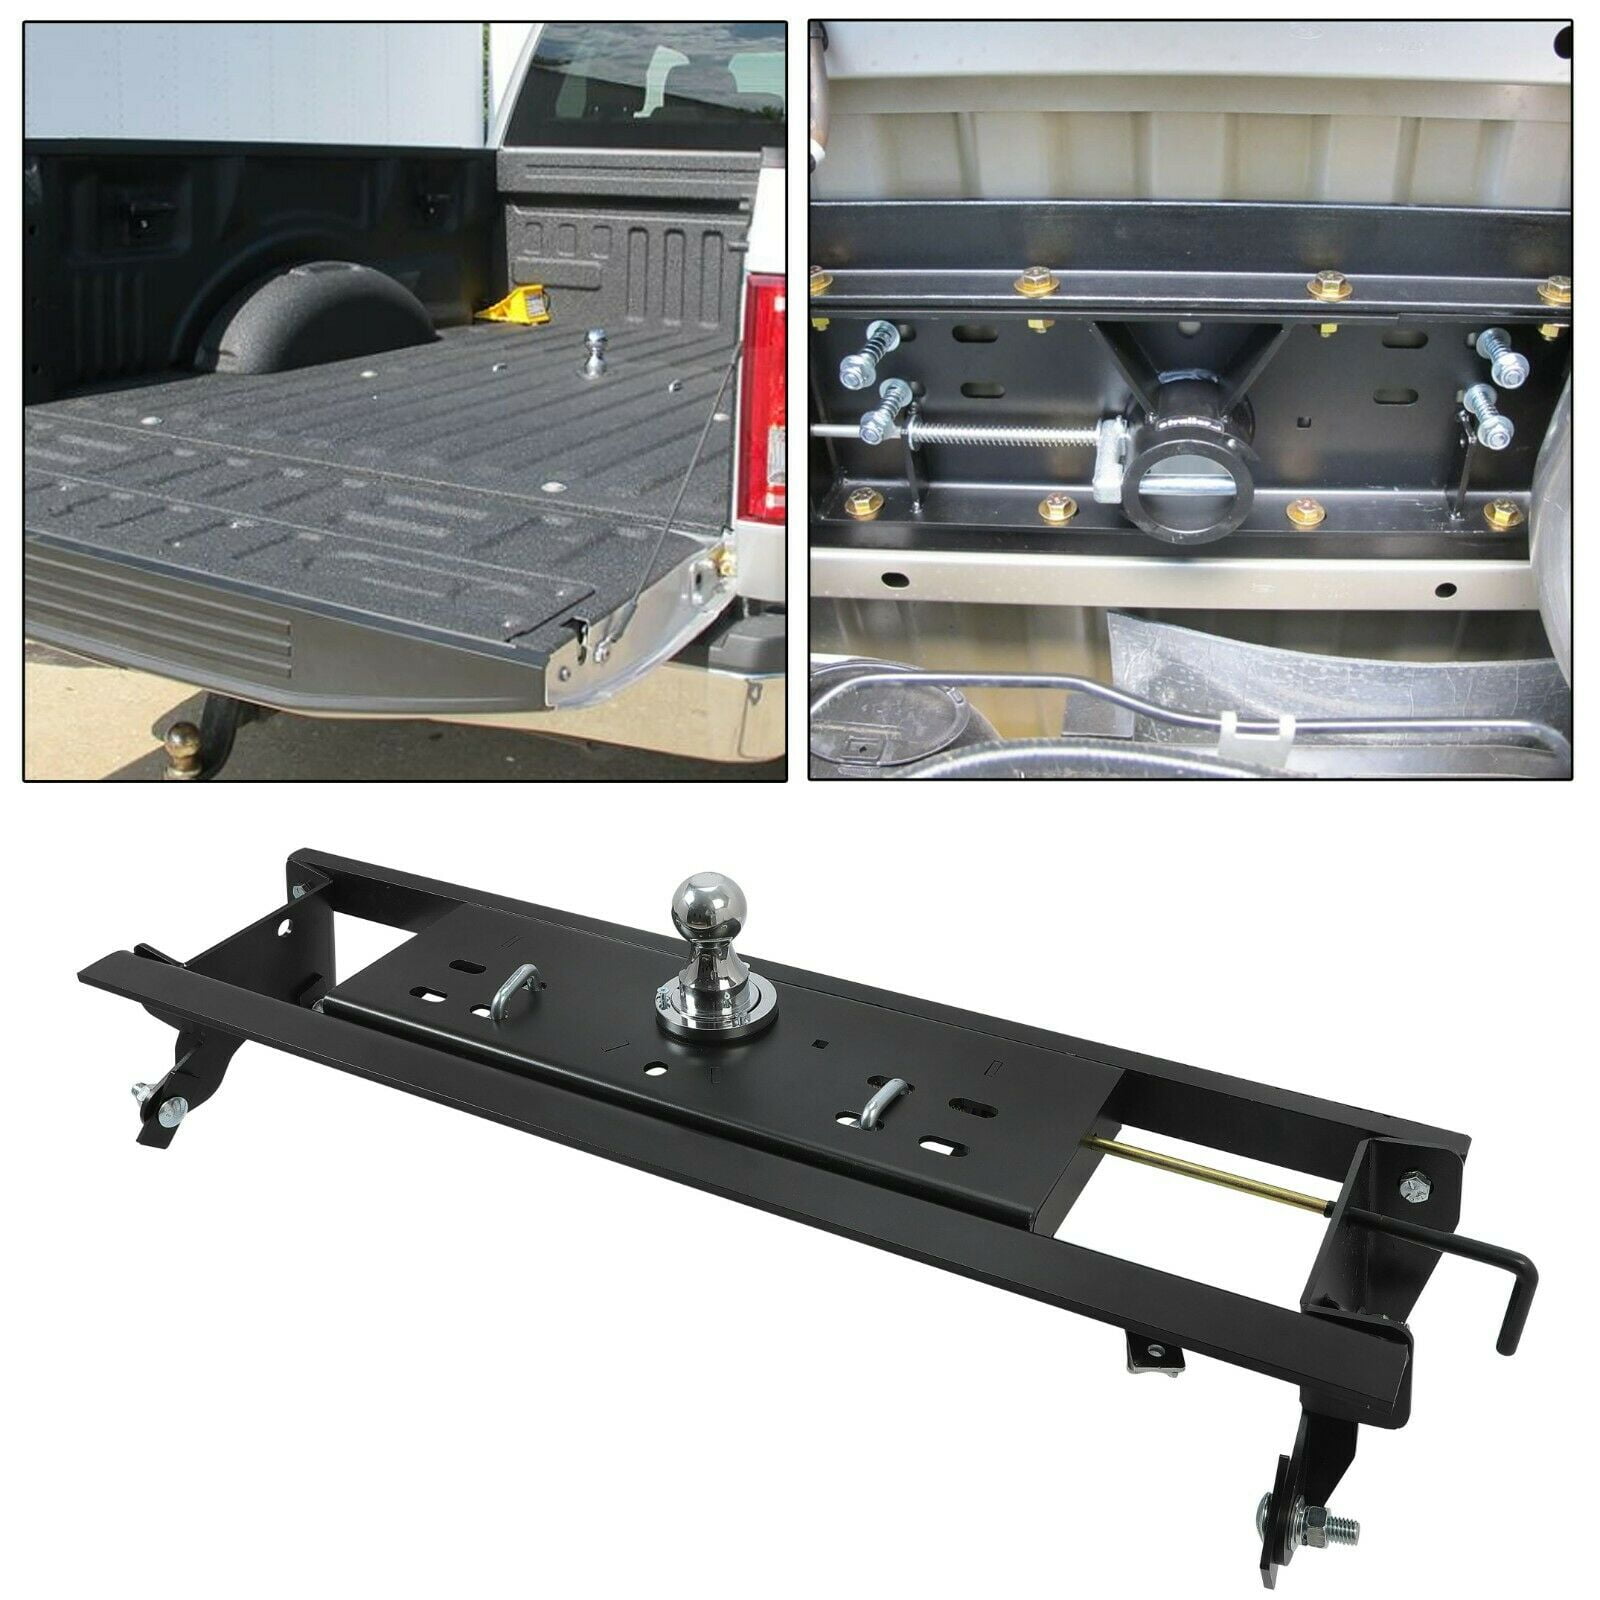 ECOTRIC Fifth Wheel Trailer Hitch Mount Rails and Installation Kits for Full-Size Trucks 